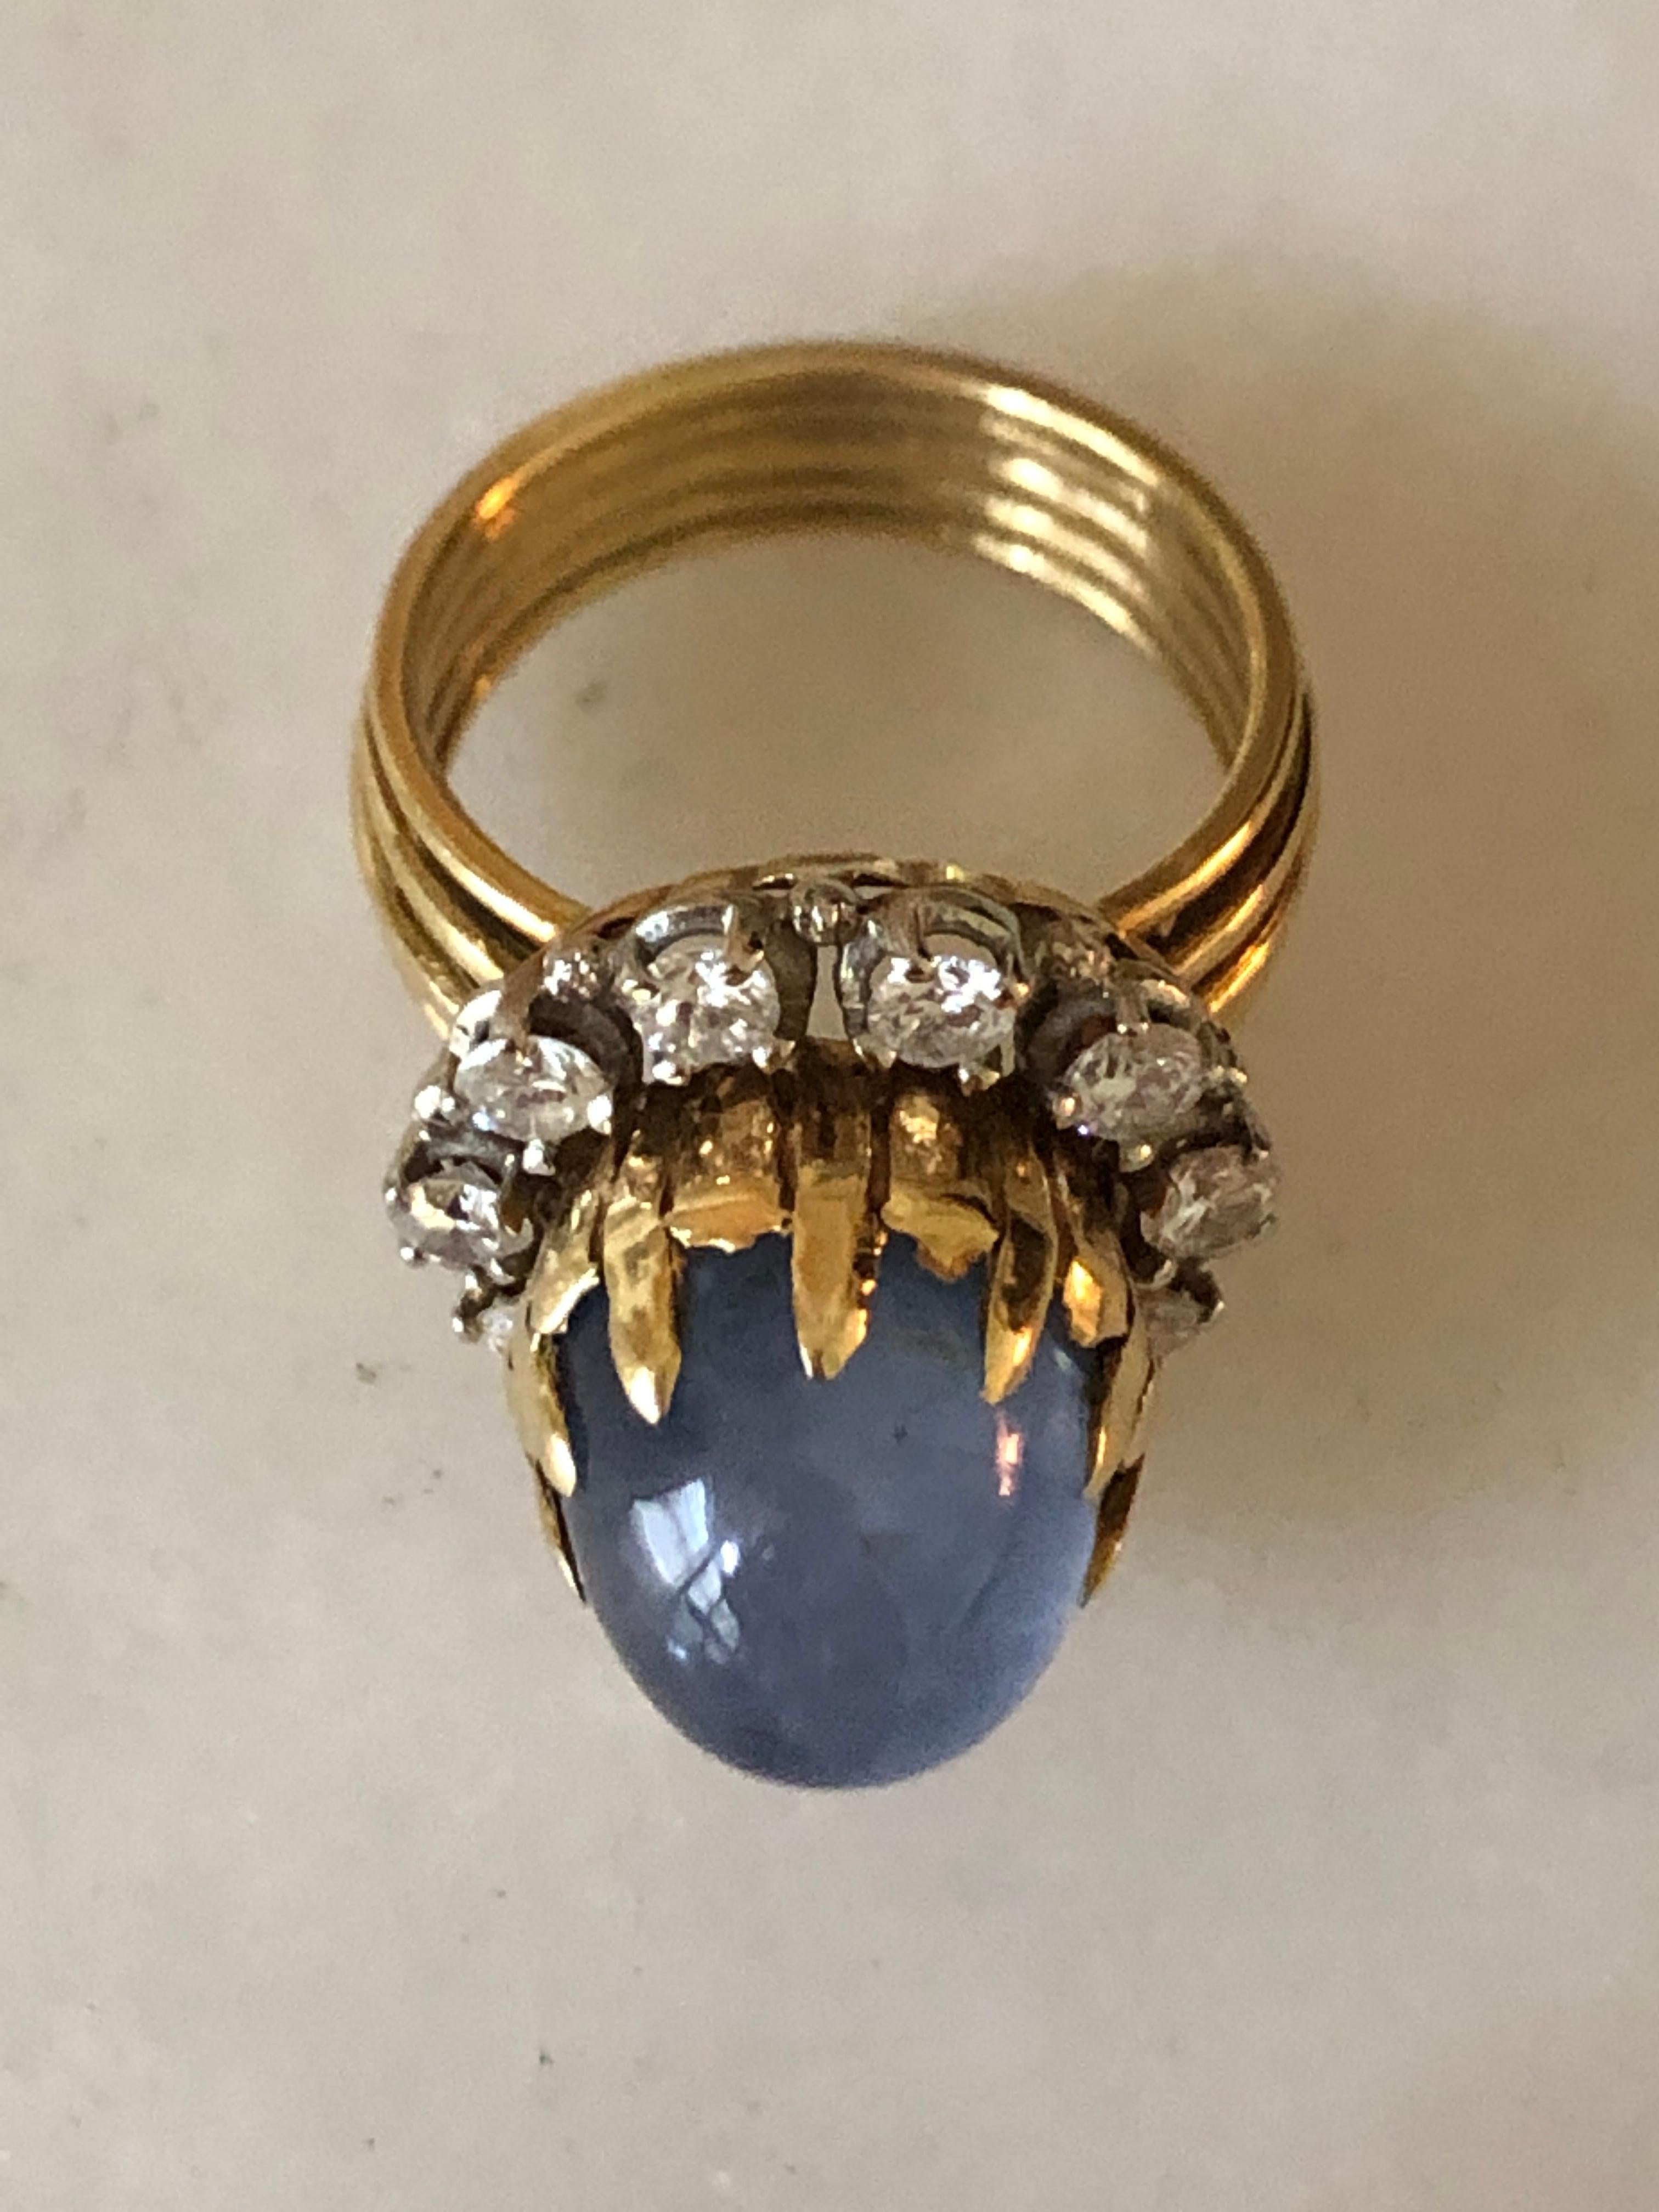 Buccellati-style star sapphire & diamond ring, Made in Italy

Buccellati-style ring is in 18 karat yellow gold with large central star sapphire surrounded by ten round brilliant diamonds. The ring bears impressed touch marks for 18 karat gold and